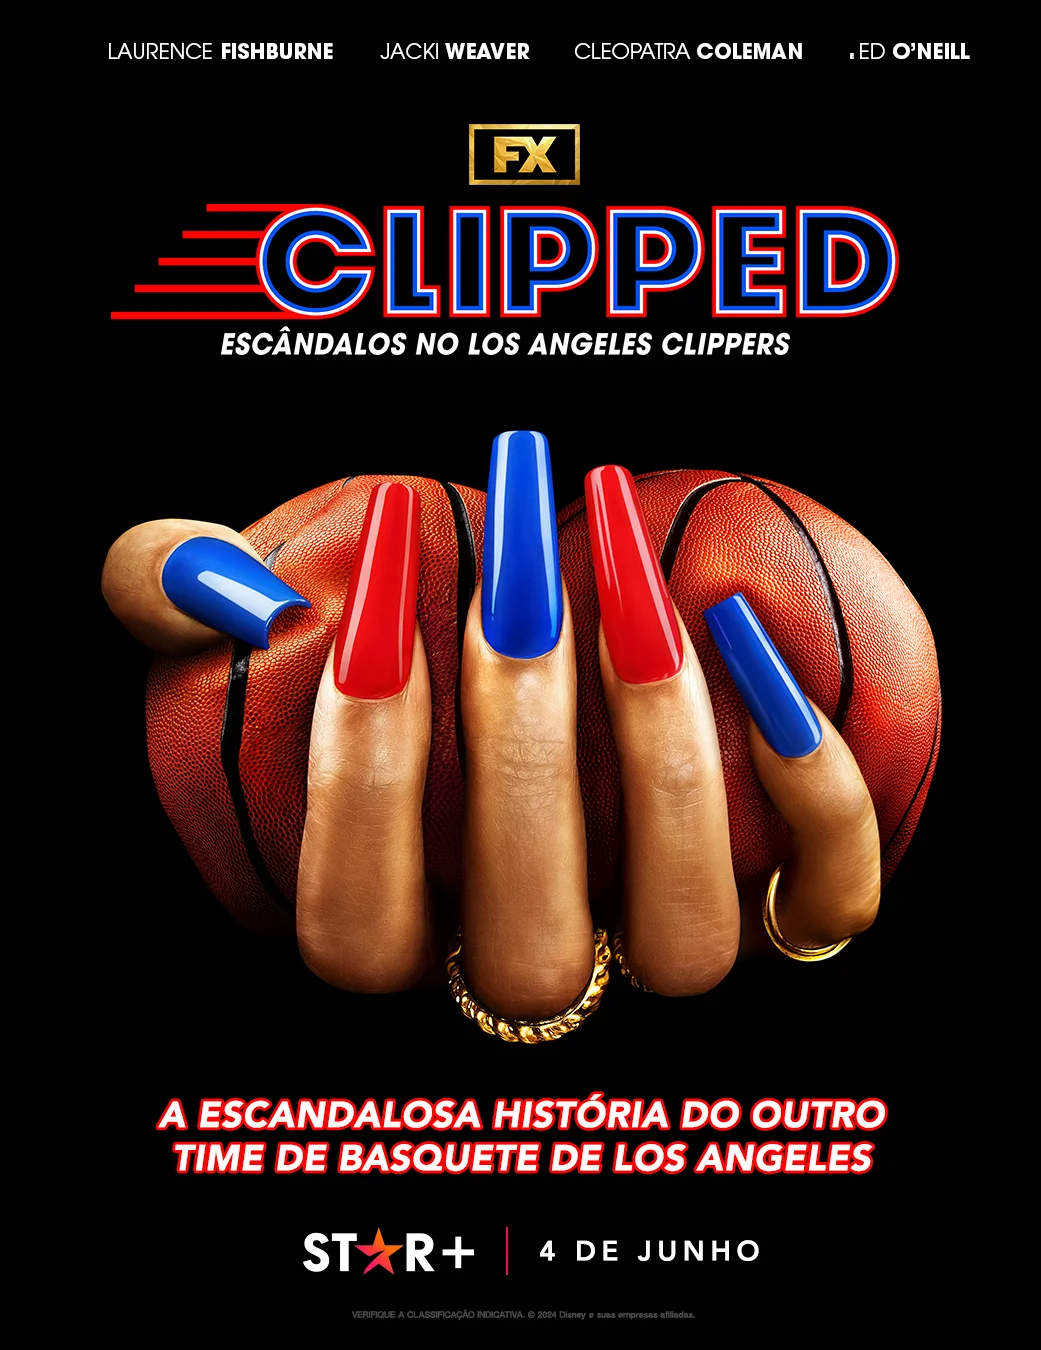 Promotional poster for the FX series "Clipped" featuring a hand with red and blue nails gripping a basketball.